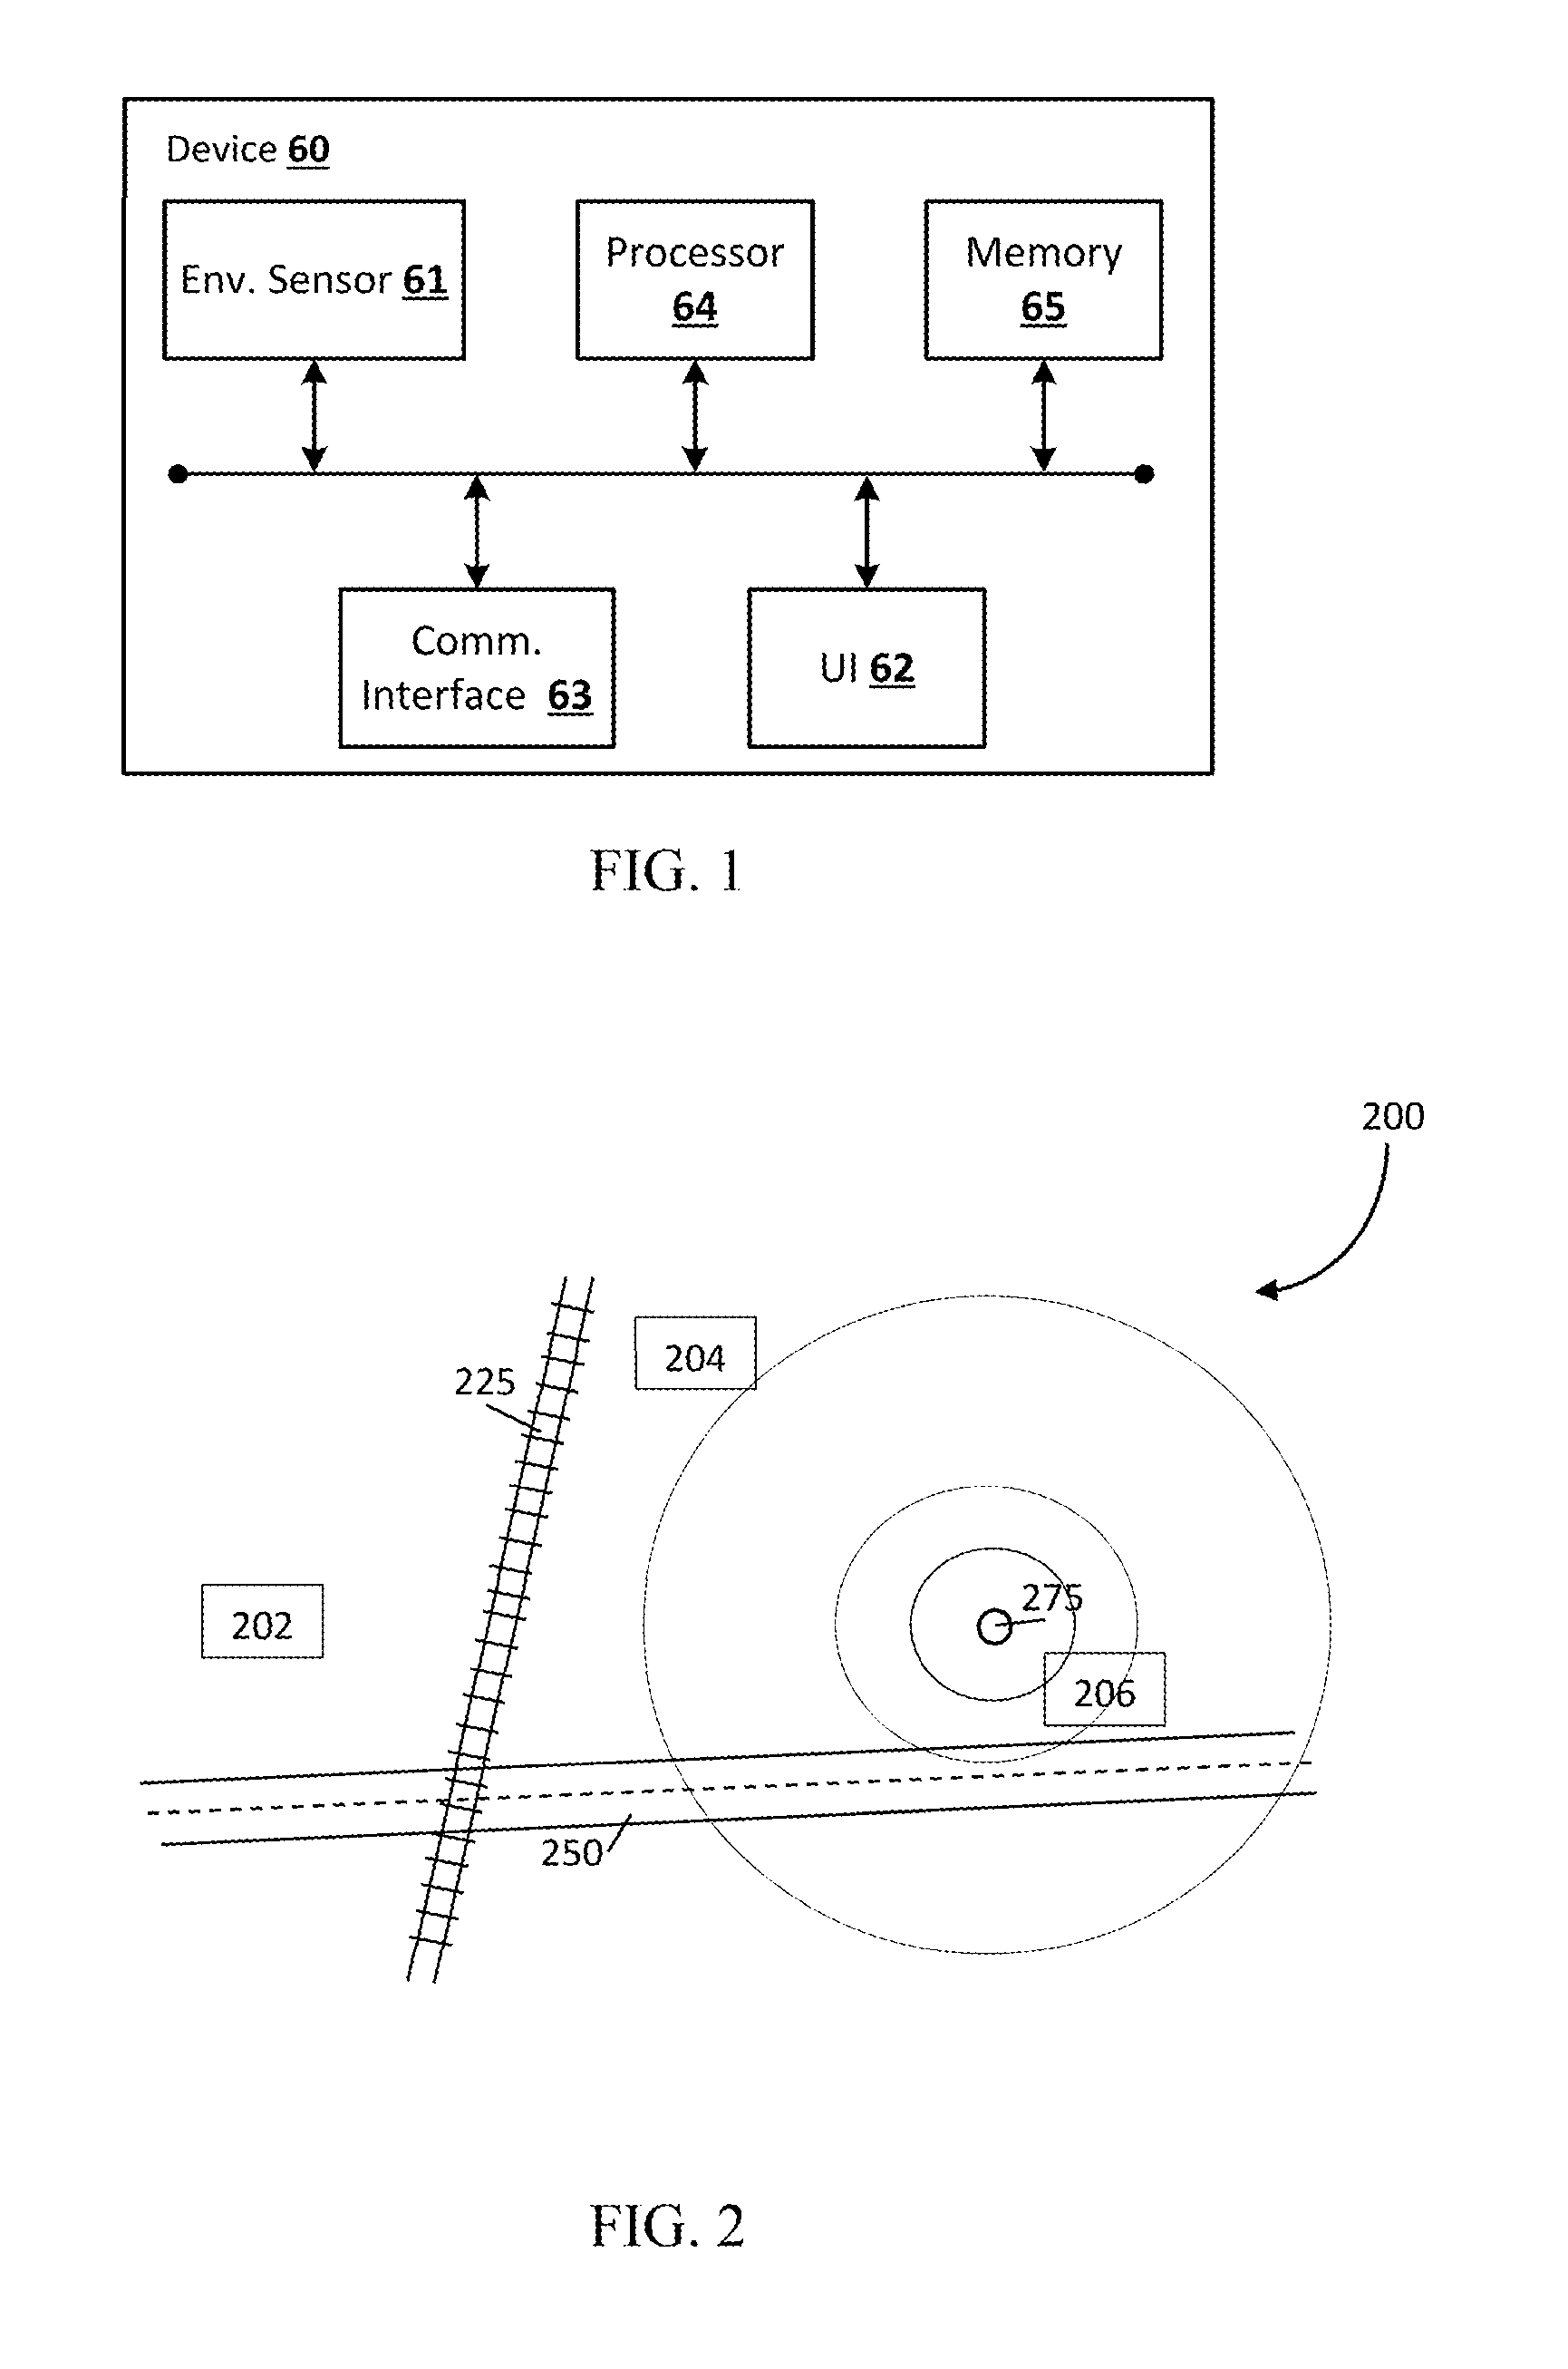 Monitoring external vibration sources for data collection